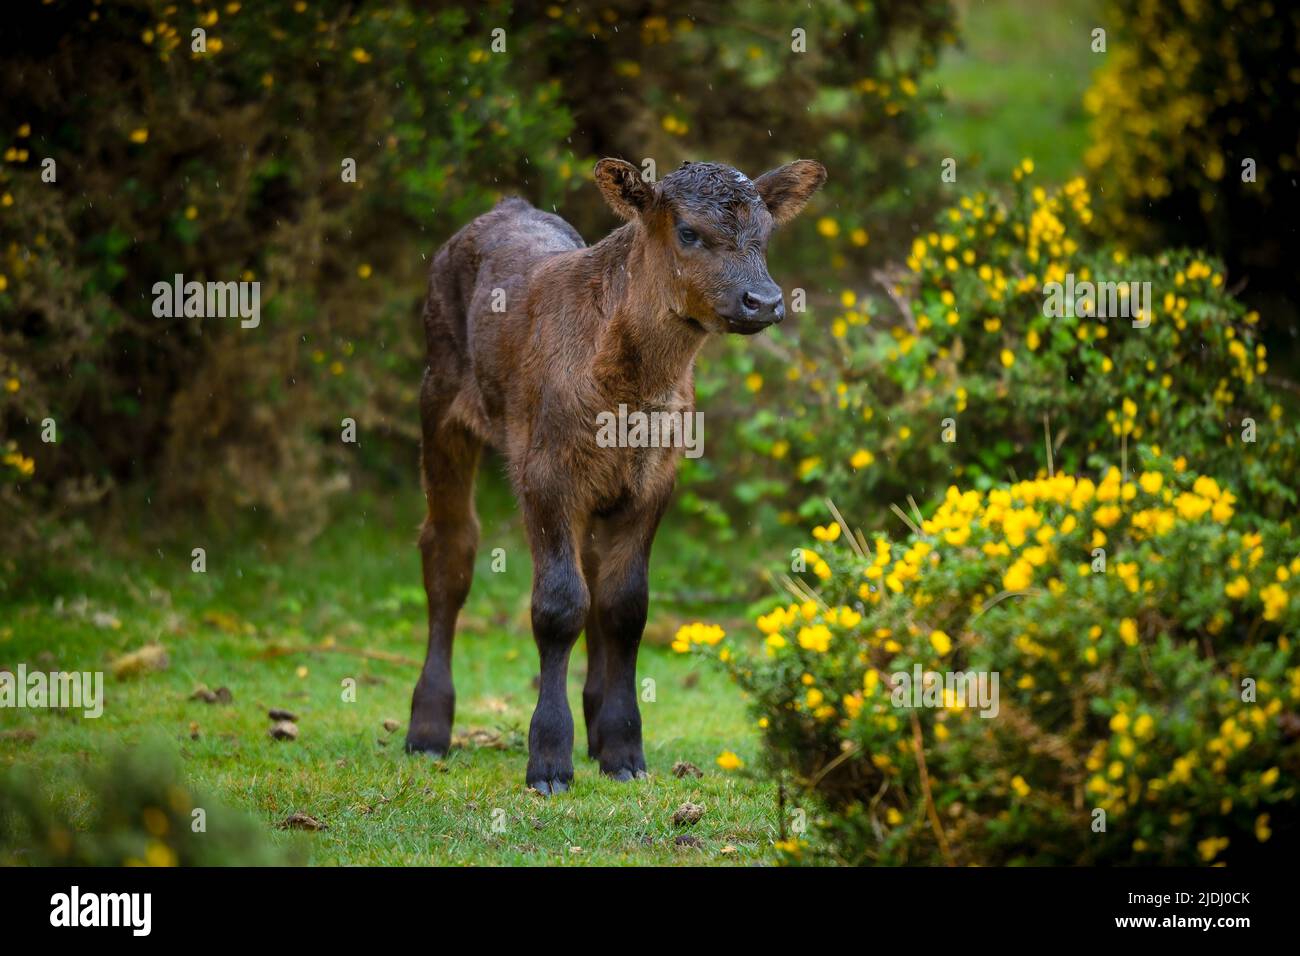 Baby brown cow ( calf ) free roaming in the New Forest national park Hampshire England amongst the flowering yellow gorse bushes. Stock Photo